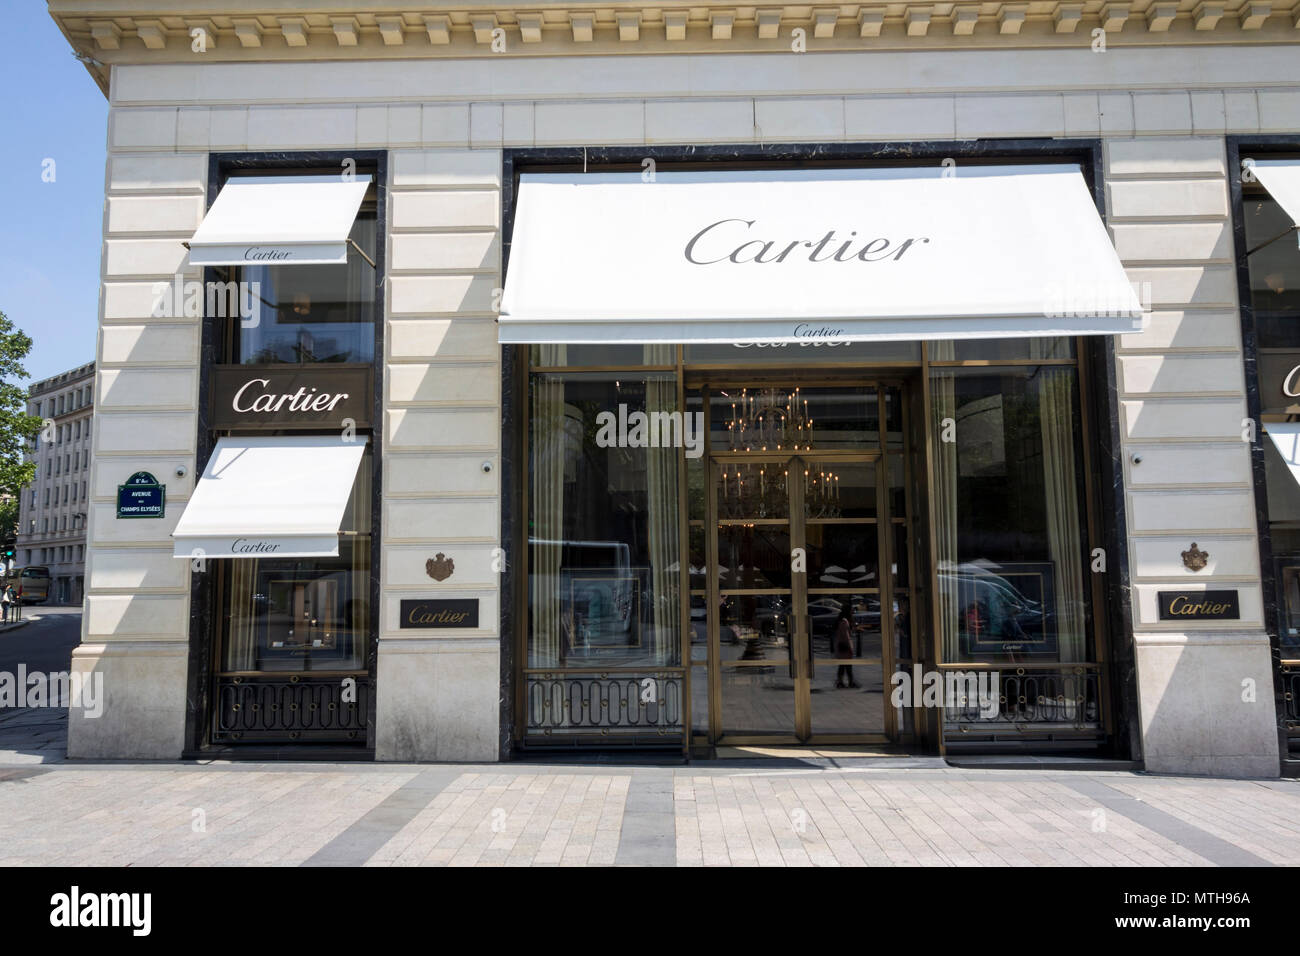 cartier store france